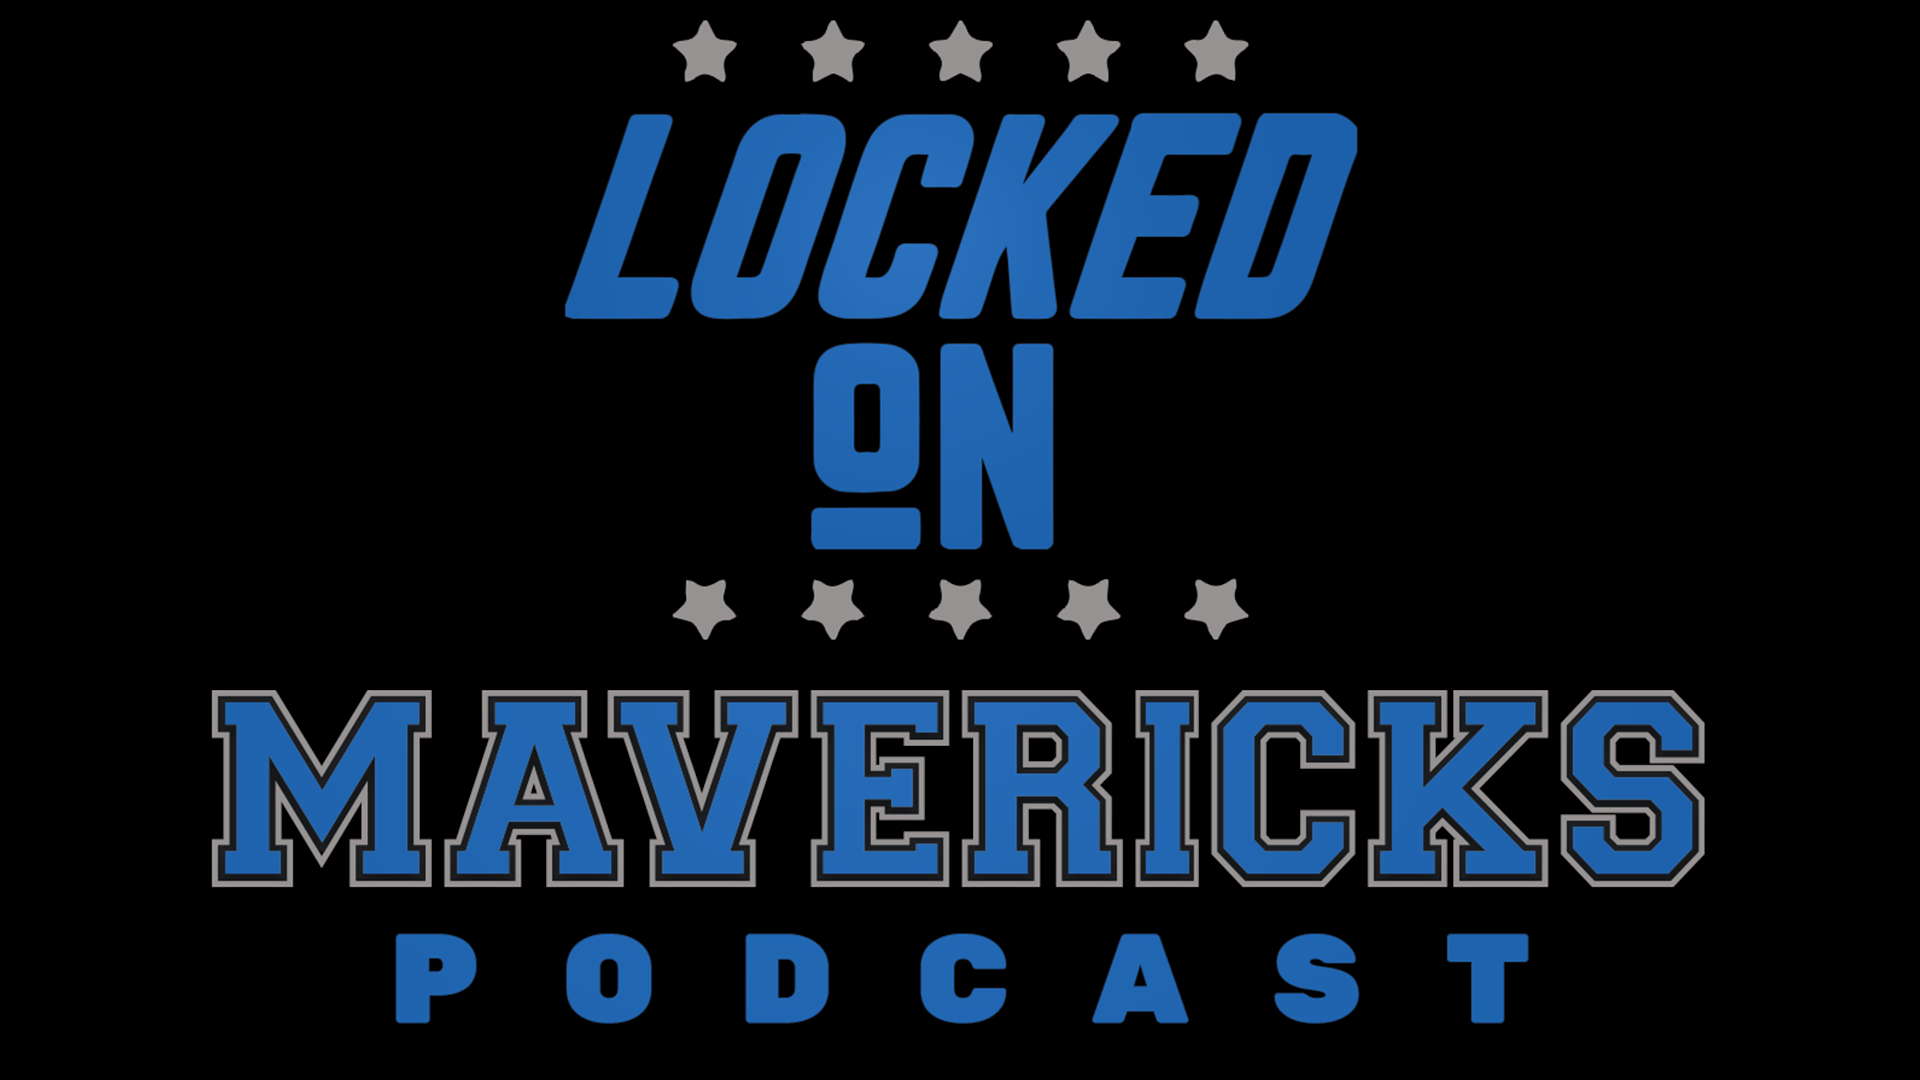 Isaac Harris is joined by Bobby Karalla of Mavs.com to talk about the Mavericks' offseason. What do they make of the recent criticism of Luka Doncic?